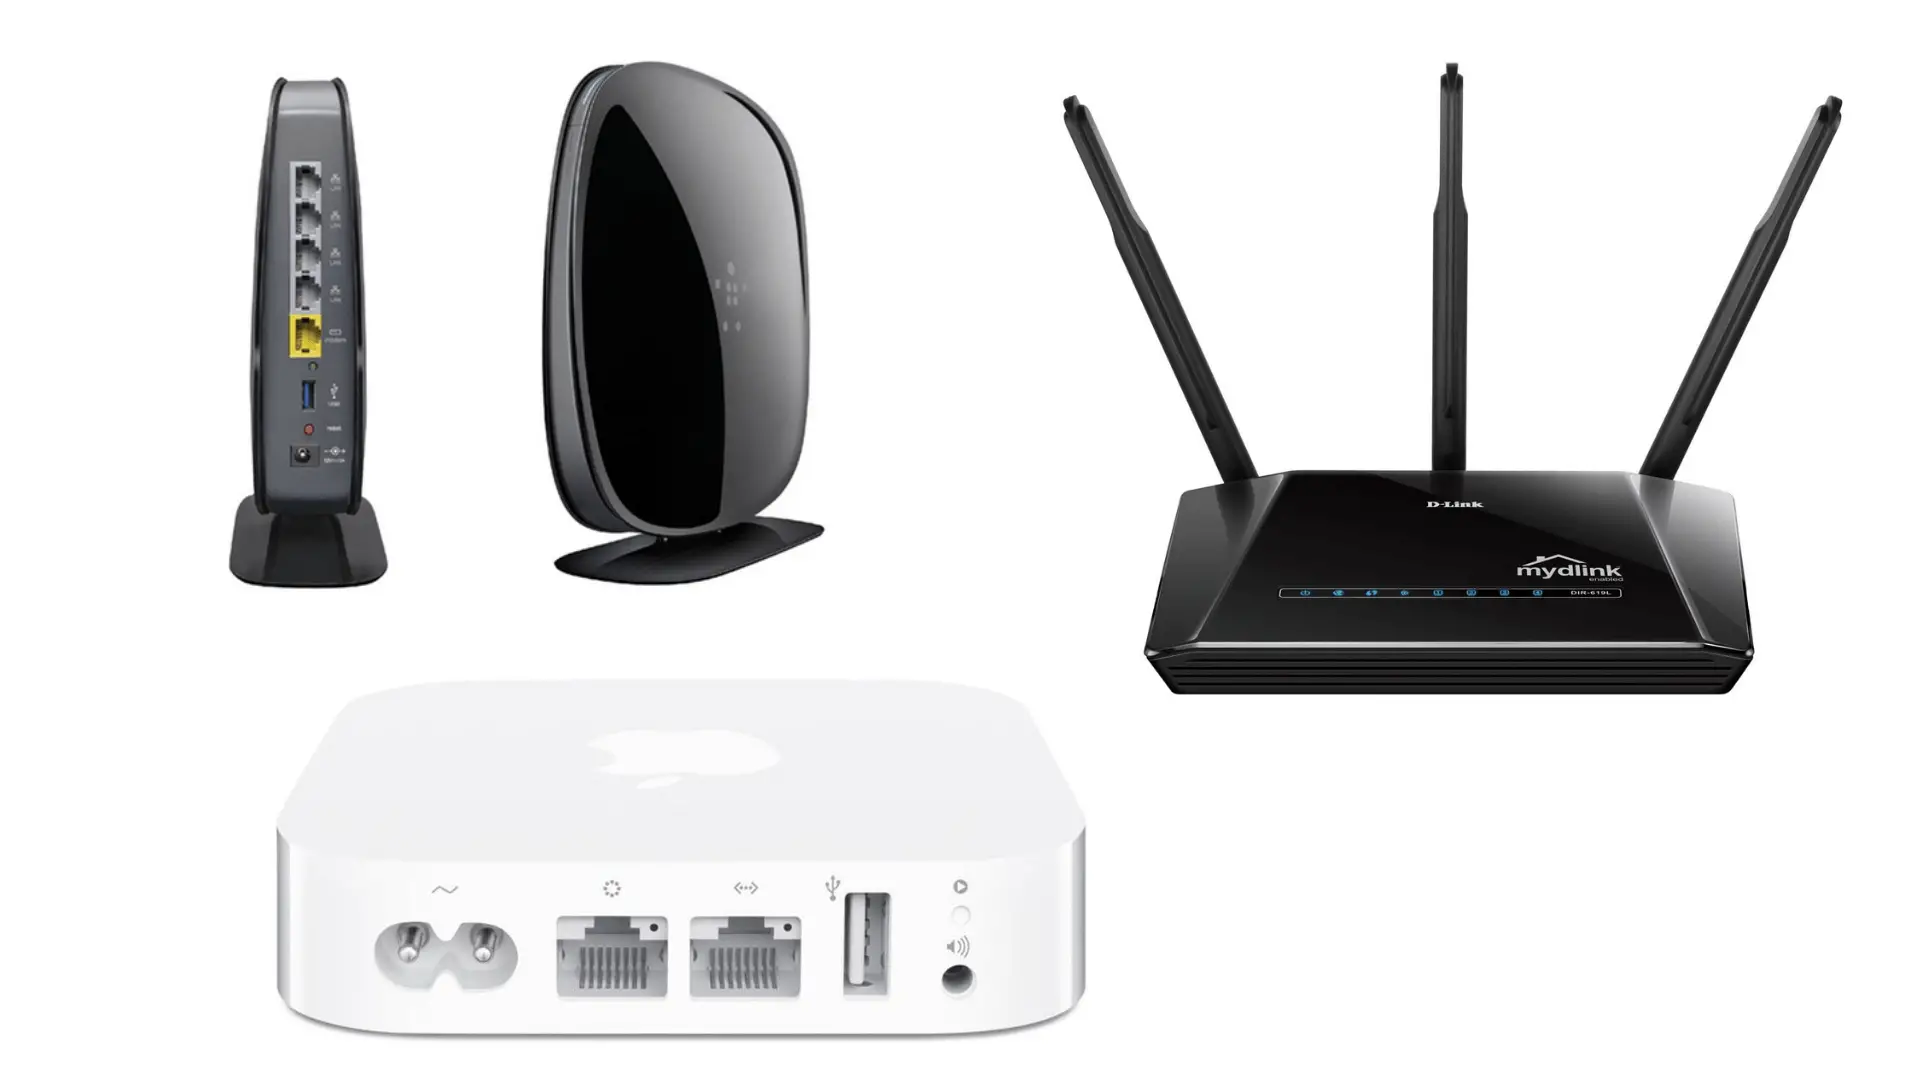 Apple Airport Express, D-Link, and Belkin routers